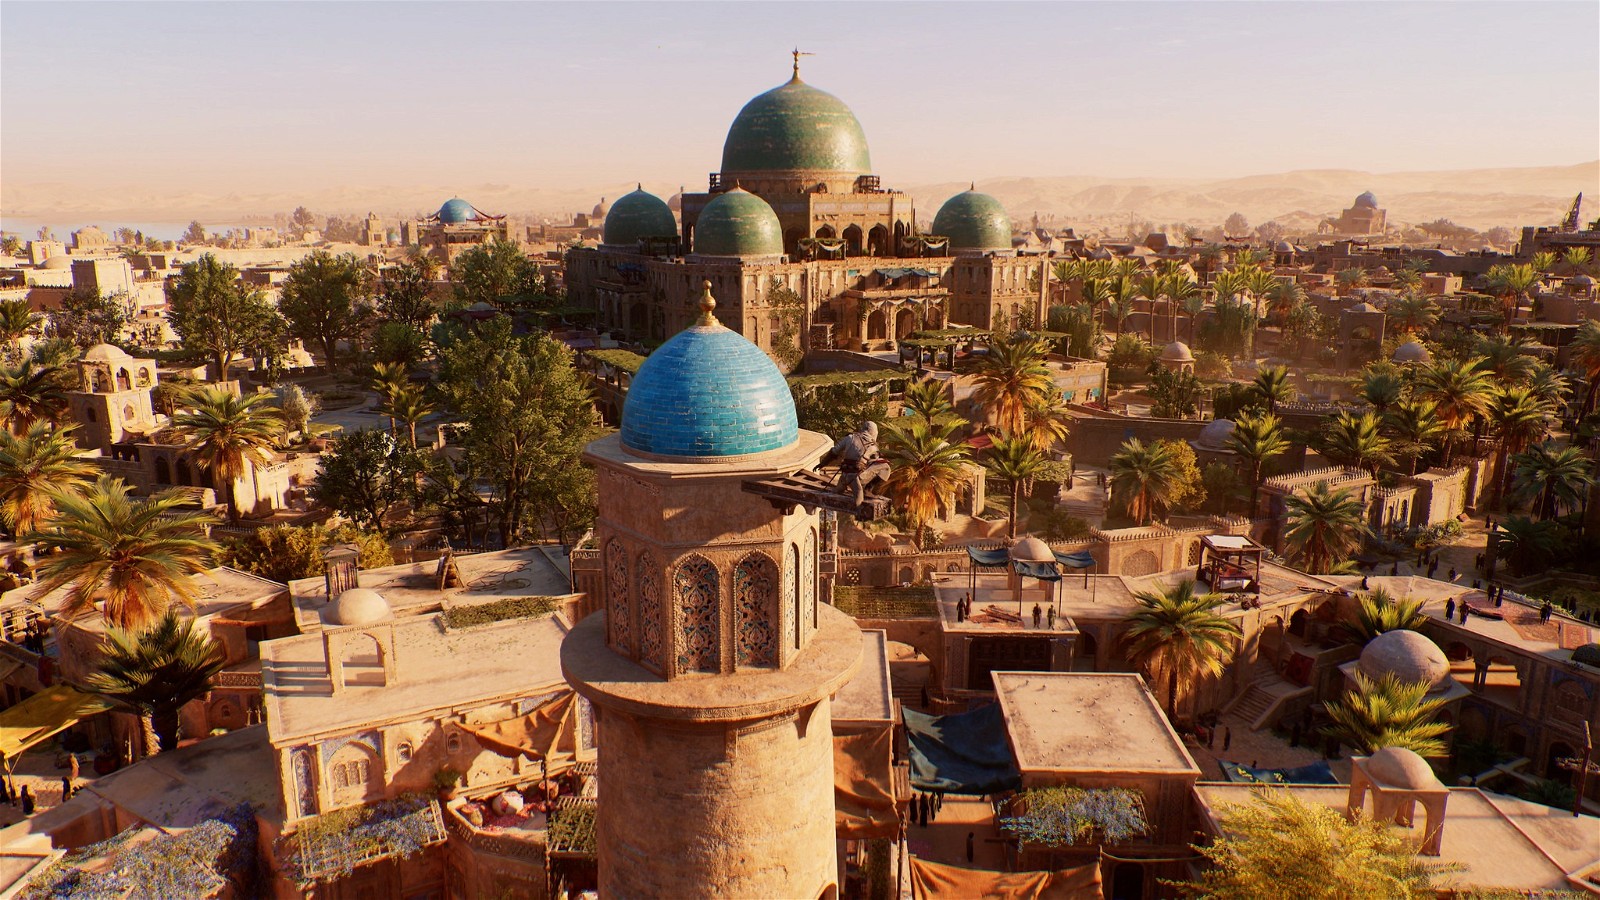 The color of the domes is very much intentional, and the most gameplay-related change of them all.